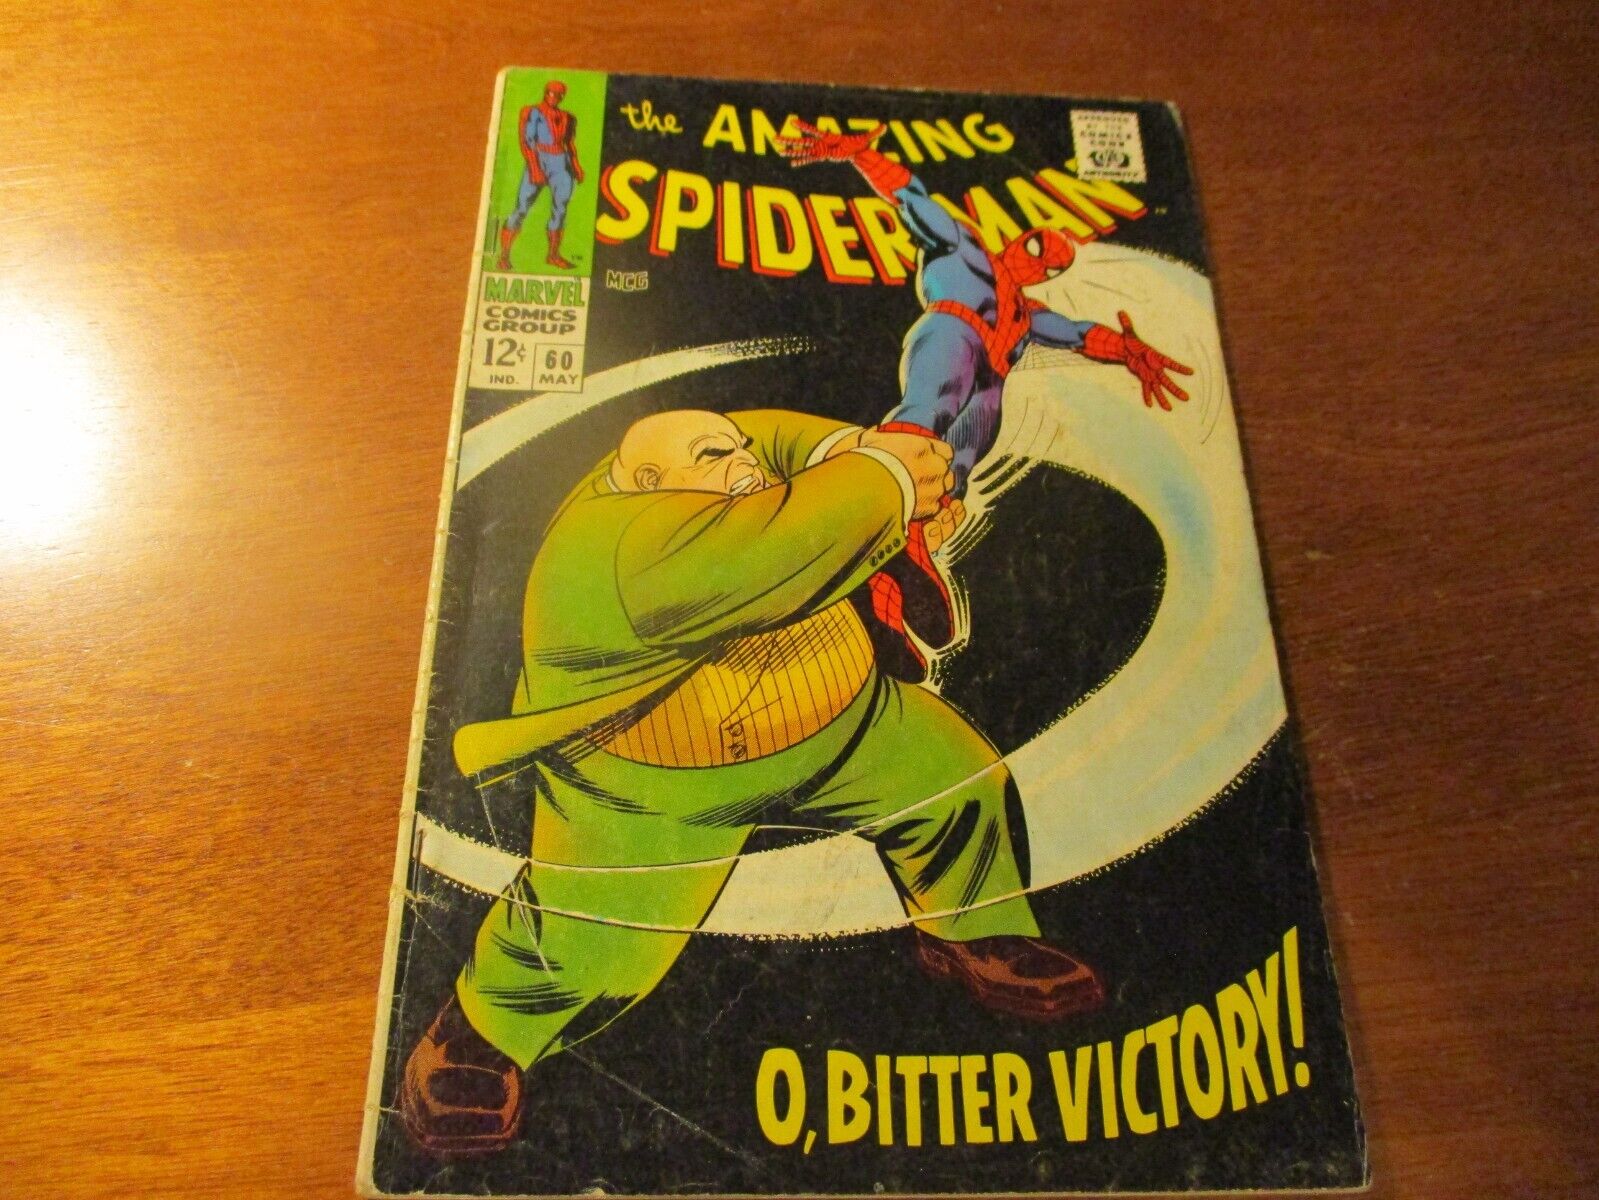 The Amazing Spider-Man #60 (1963) in VG+/Ex complete condition - Grade ready